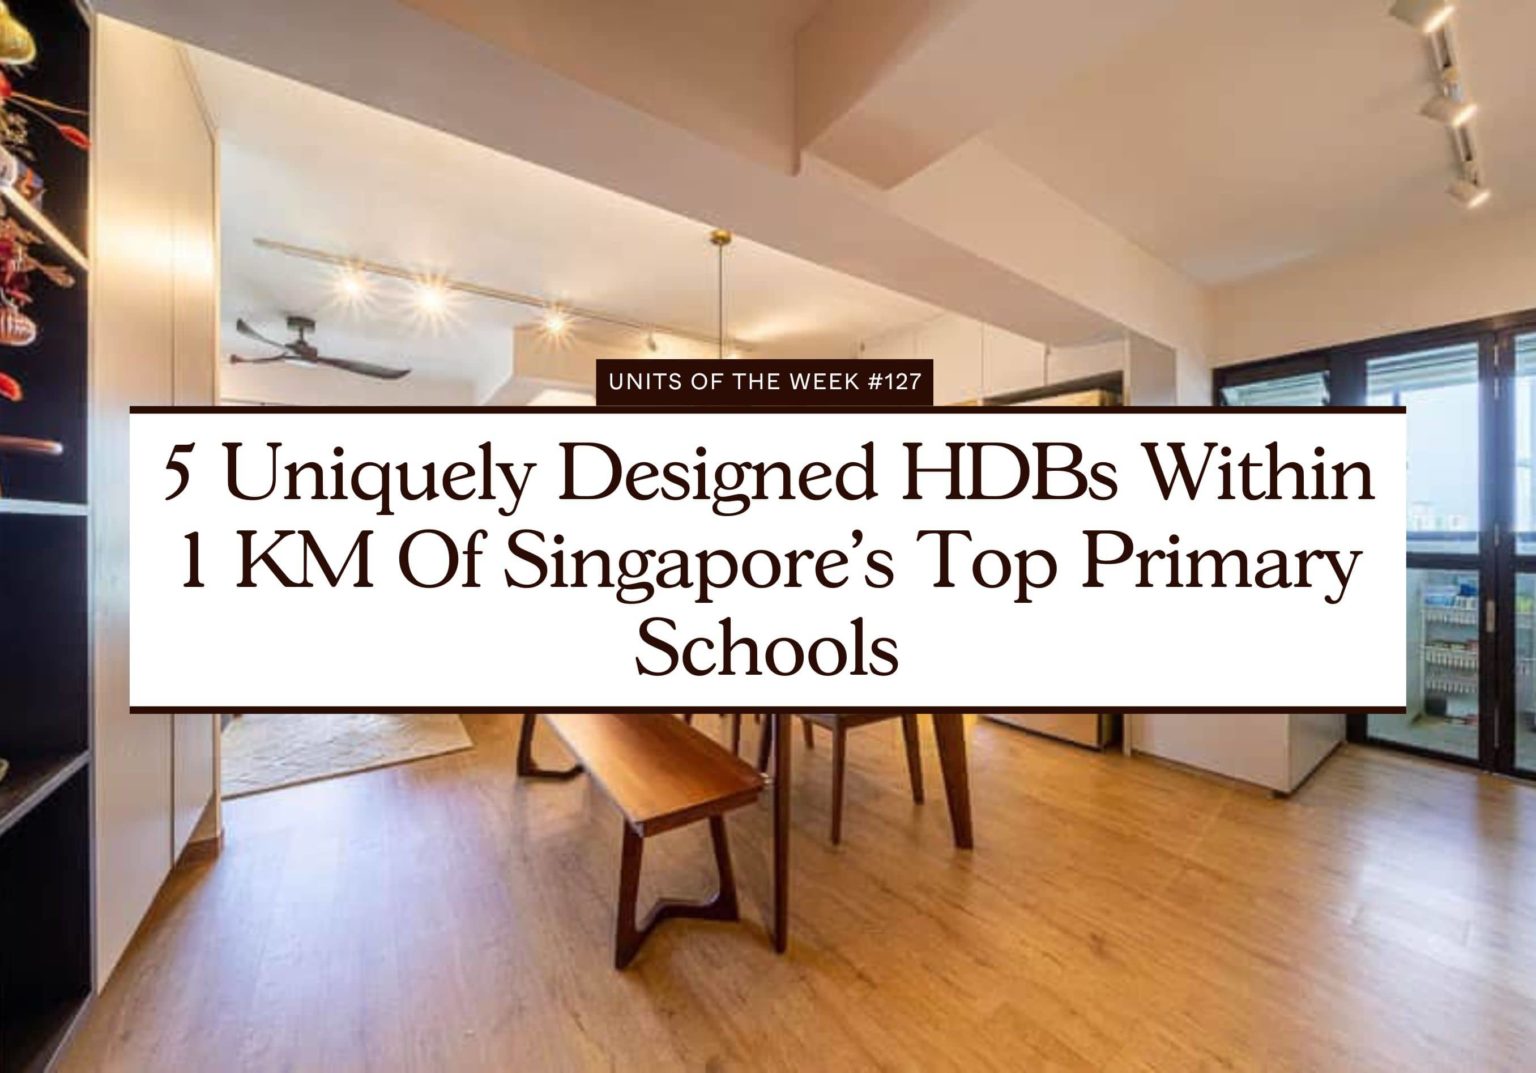 5 Uniquely Designed HDBs Within 1 KM Of Singapores Top Primary Schools